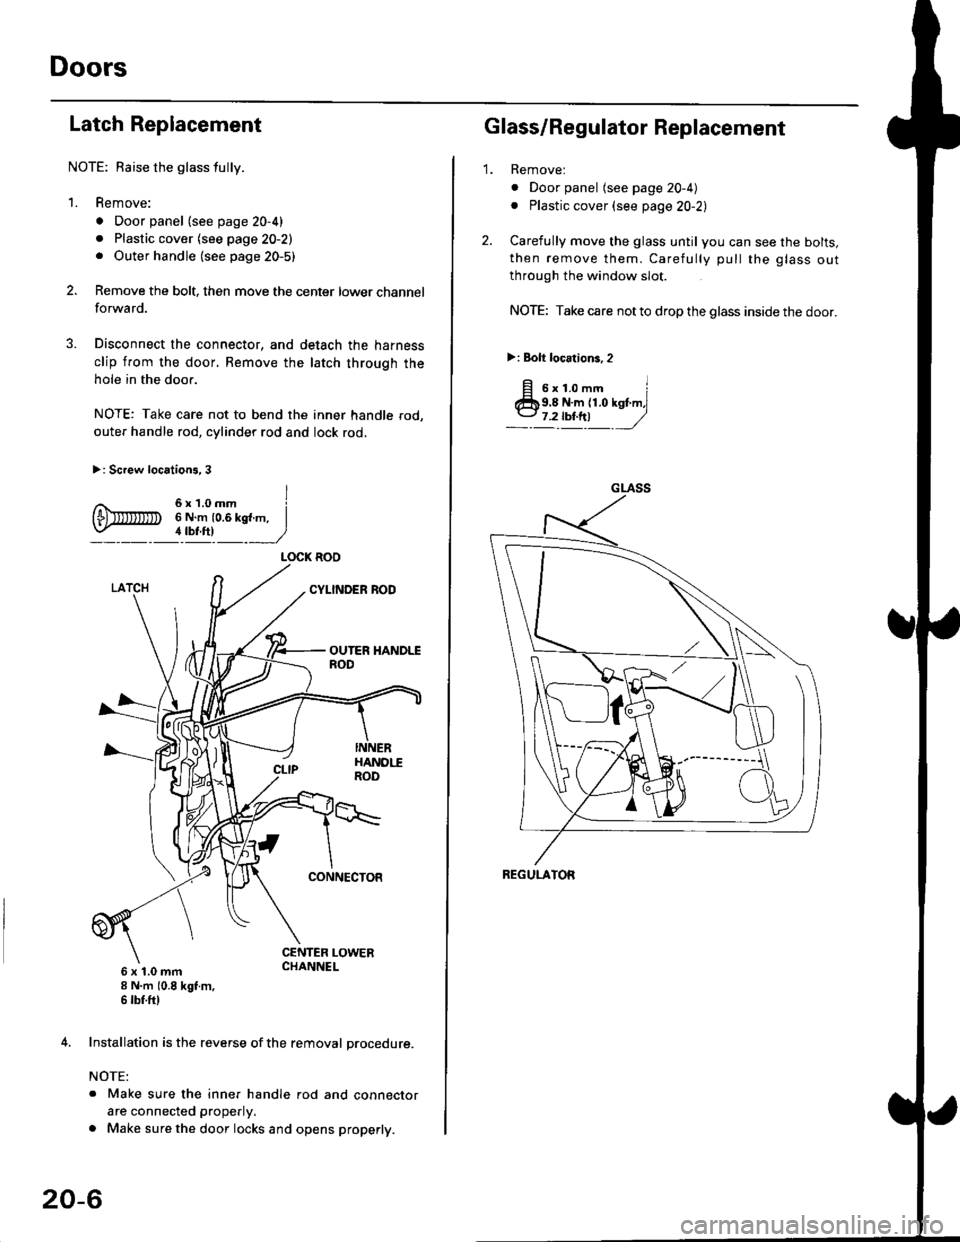 HONDA CIVIC 1996 6.G Workshop Manual Doors
Latch Replacement
NOTE: Baise the glass fully.
1. Remove:
. Door panel (see page 20-4)
. Plastic cover (see page 20-2). Outer handle (see page 20-5)
Remove the bolt, then move the center lower c